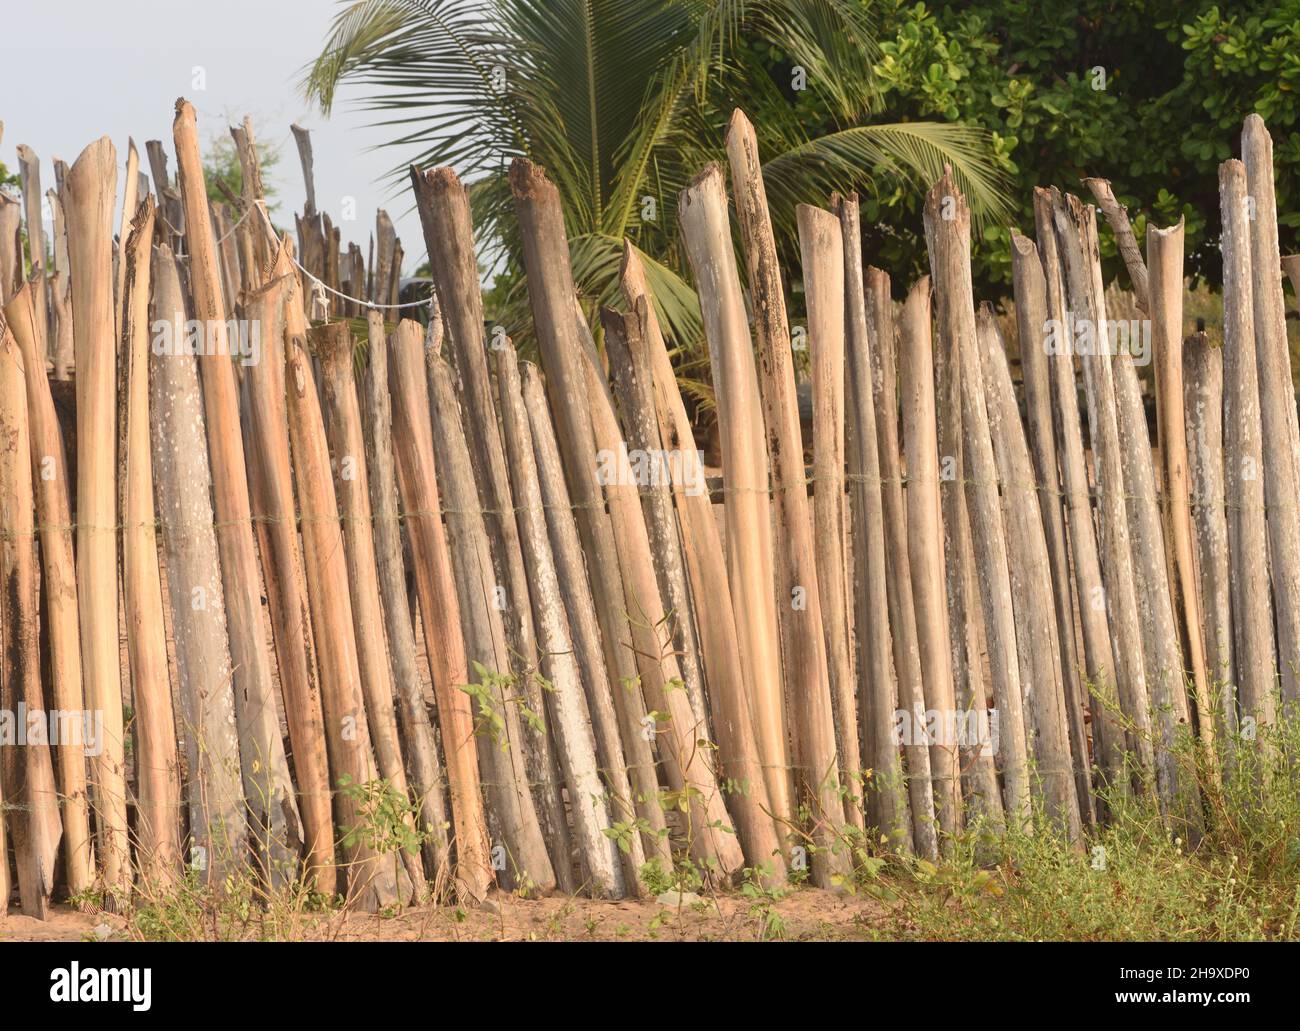 A fence round a vegetable garden made from the leaf stalks, petioles, of palm fronds. Kartong,  The Republic of the Gambia. Stock Photo